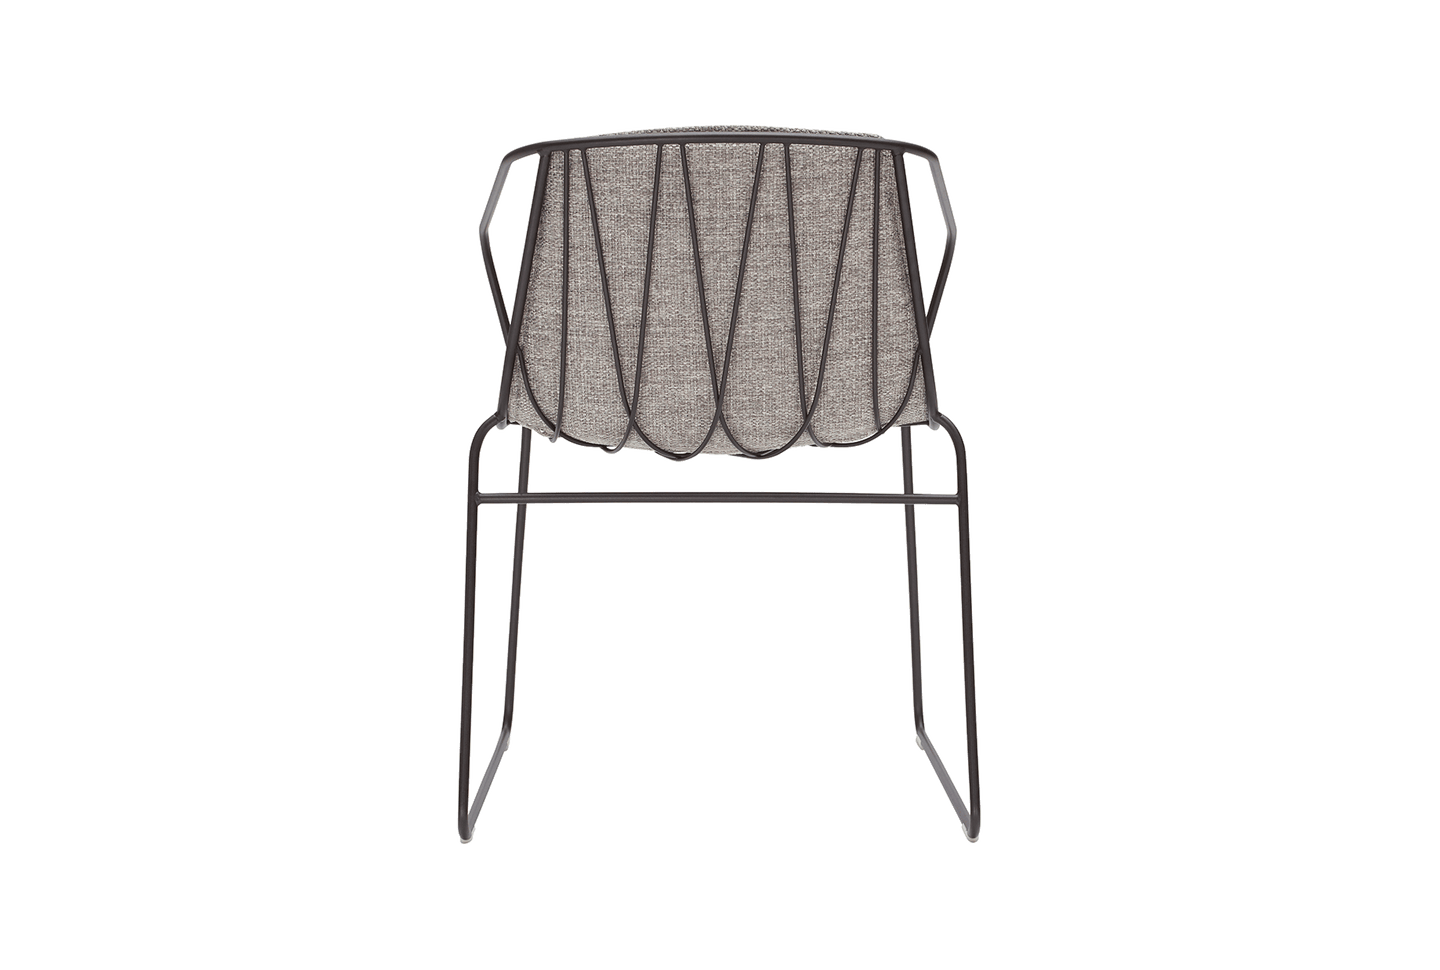 Chee Chair with Arms
